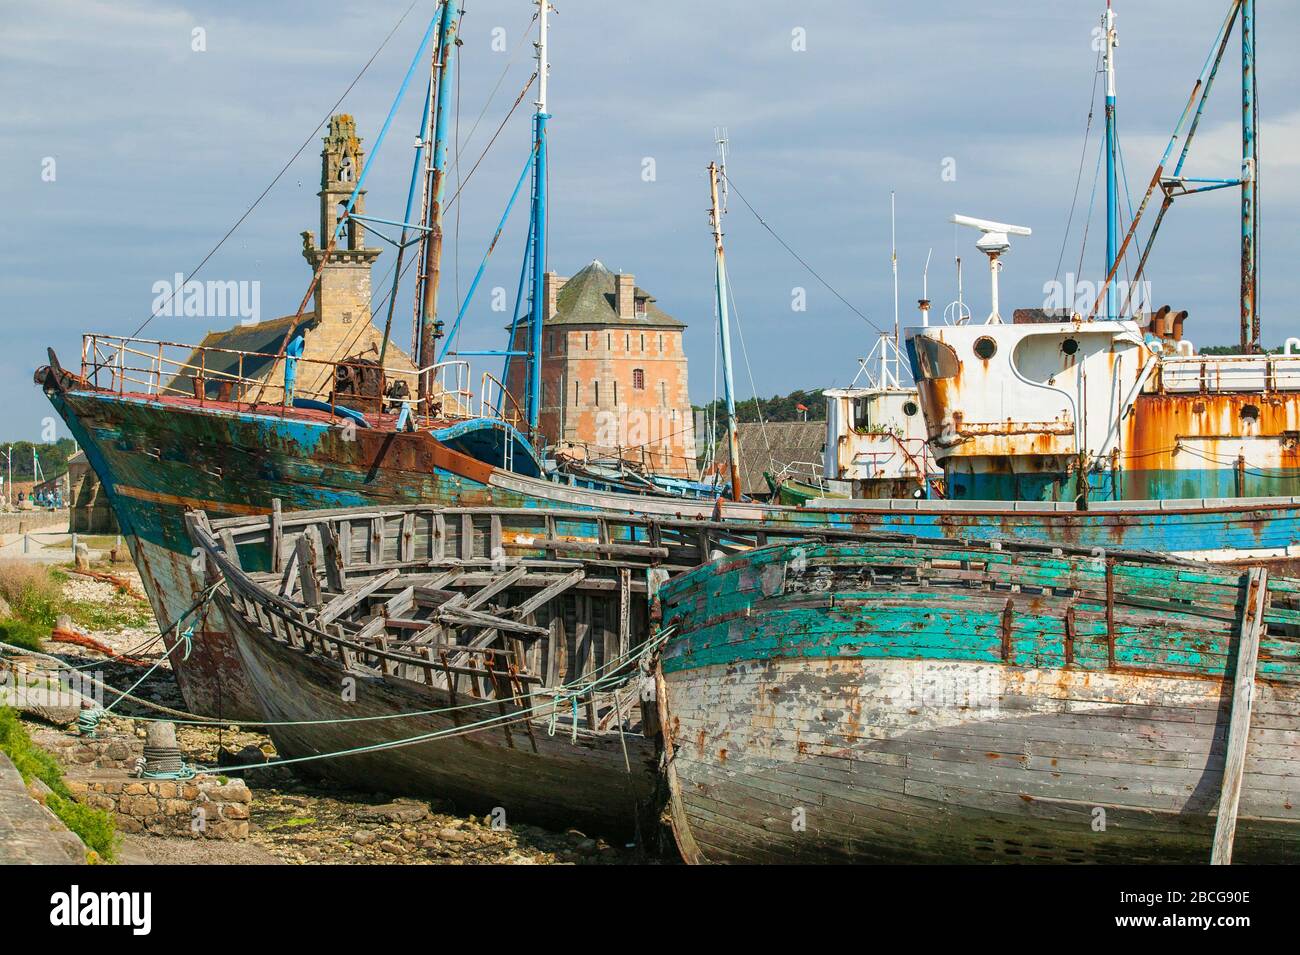 rotten fishing vessels on the beach of the picturesk breton village of Camaret sur mer, Britanny, France Stock Photo